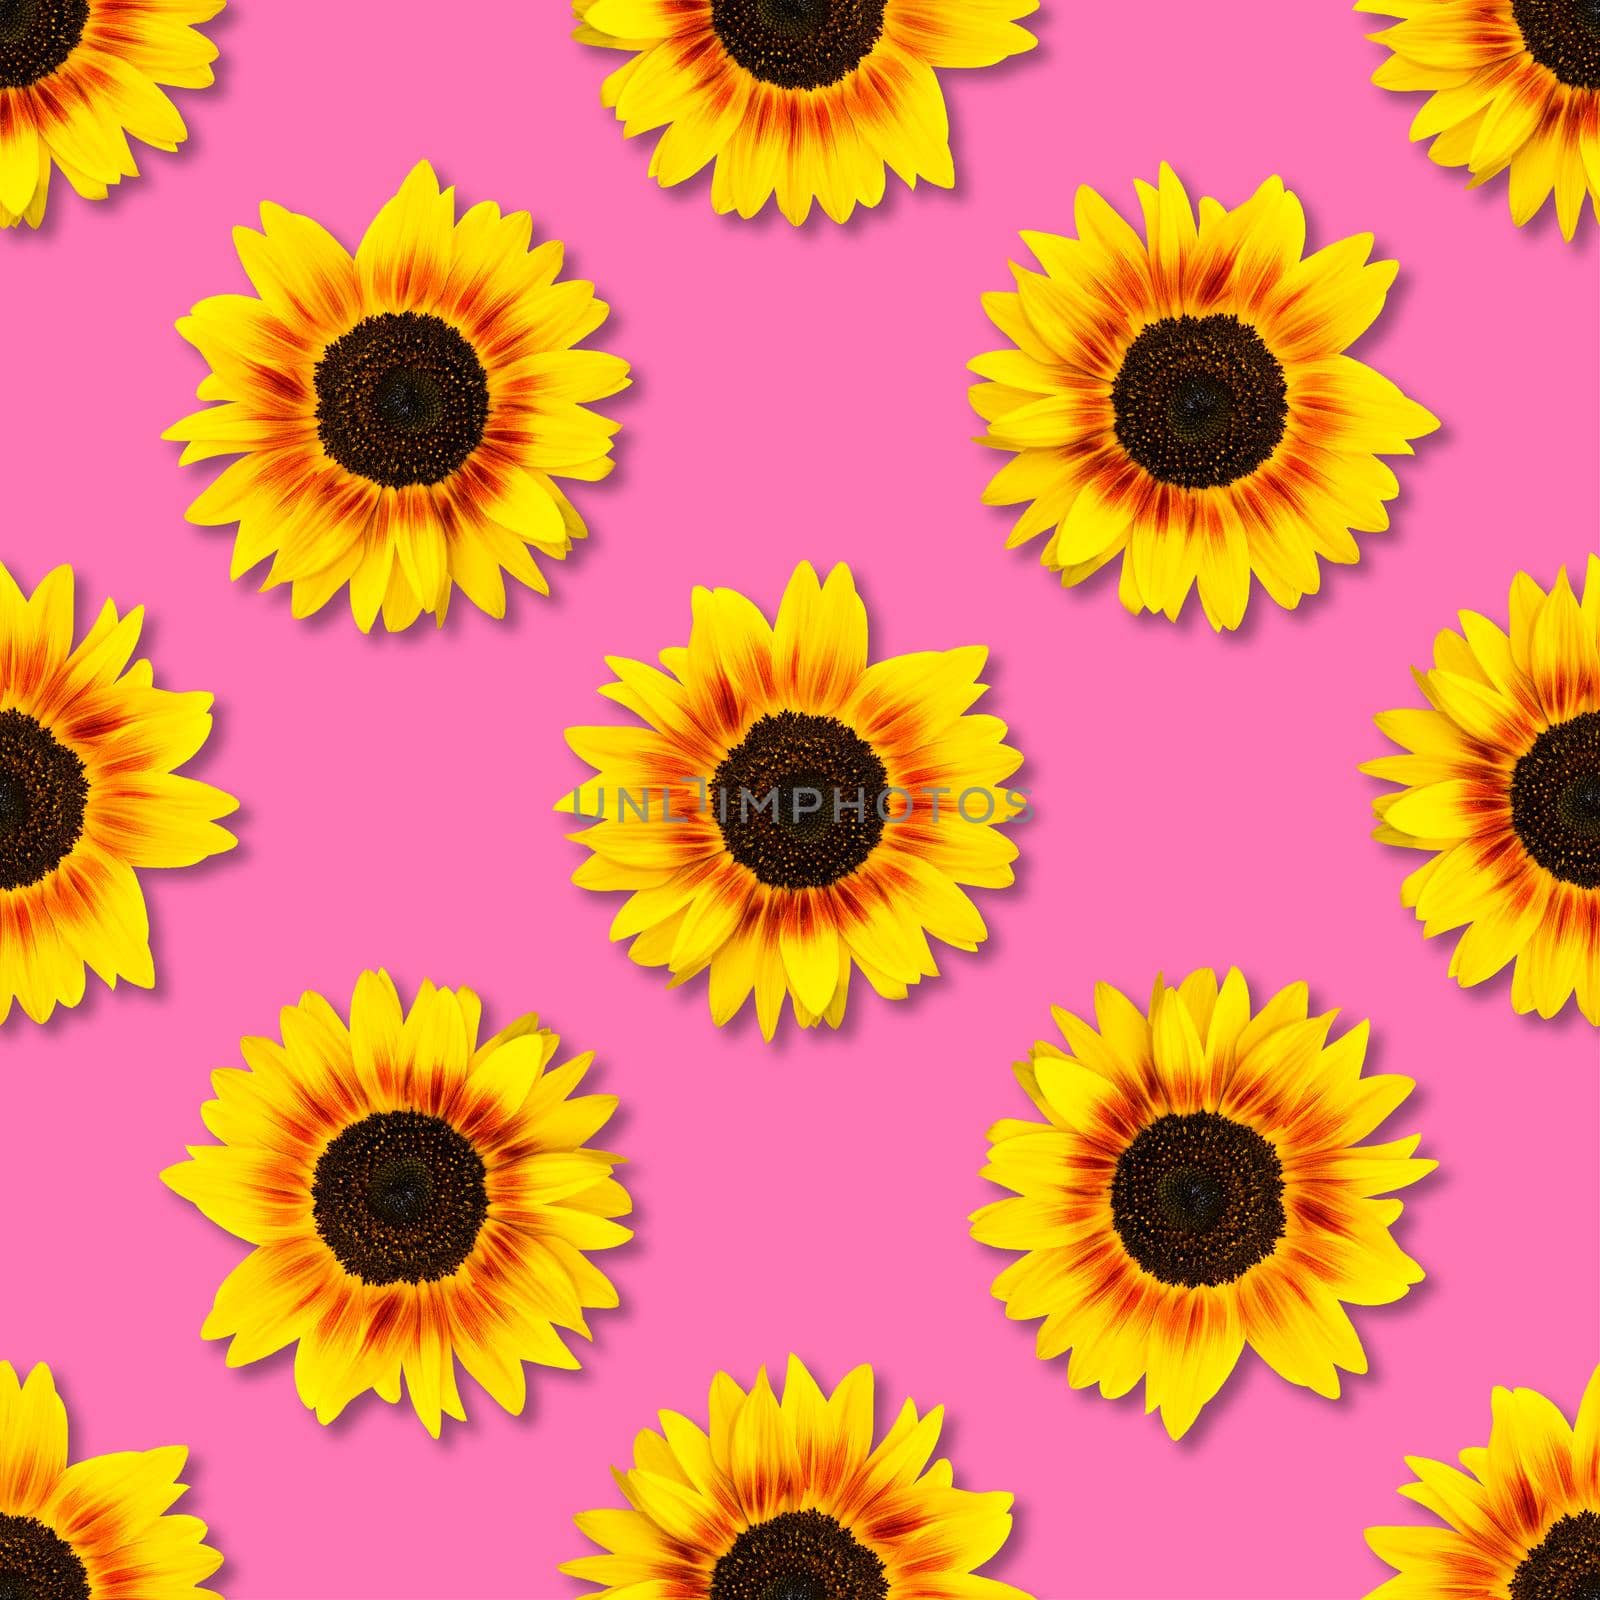 Sunflower seamless pattern. Bright yellow sunflowers on pink background. Floral pattern. Top view, flat lay.